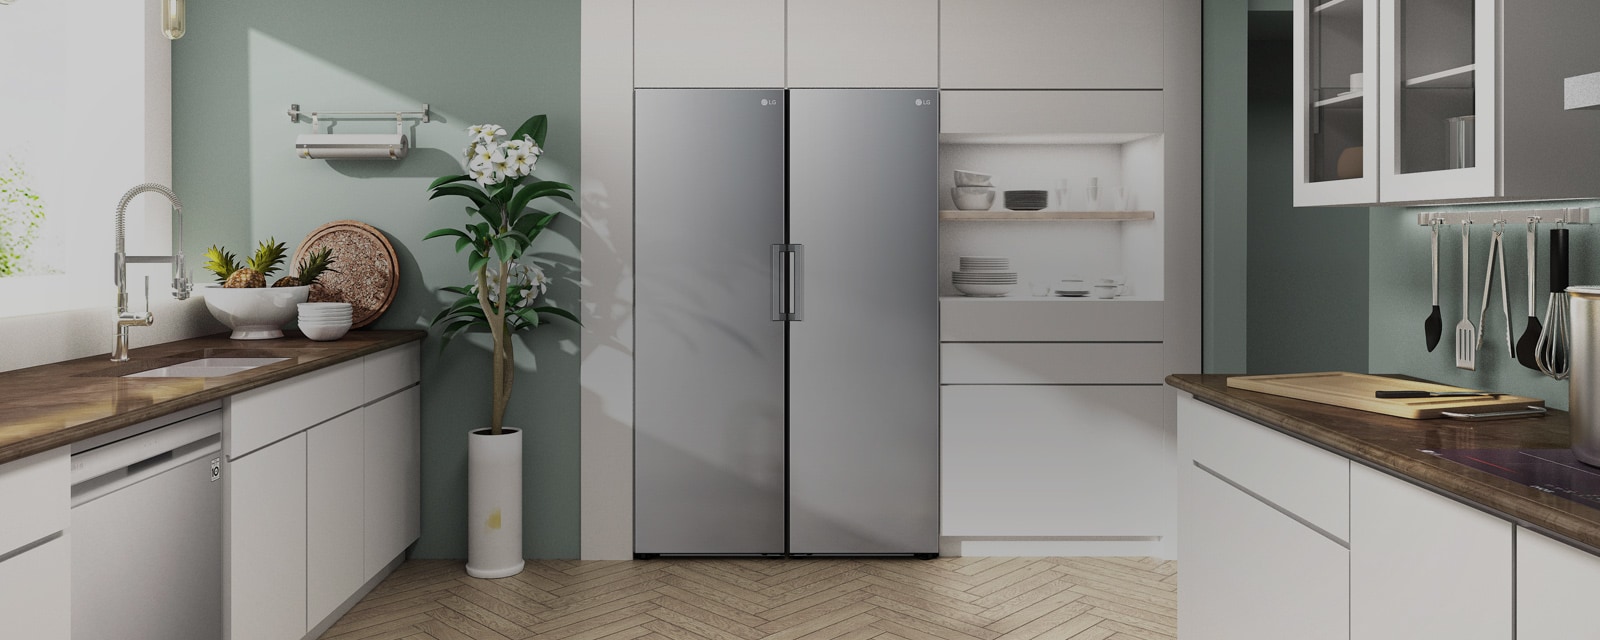 The front view of the refrigerator and freezer or shown fitting in seamlessly in a modern kitchen.